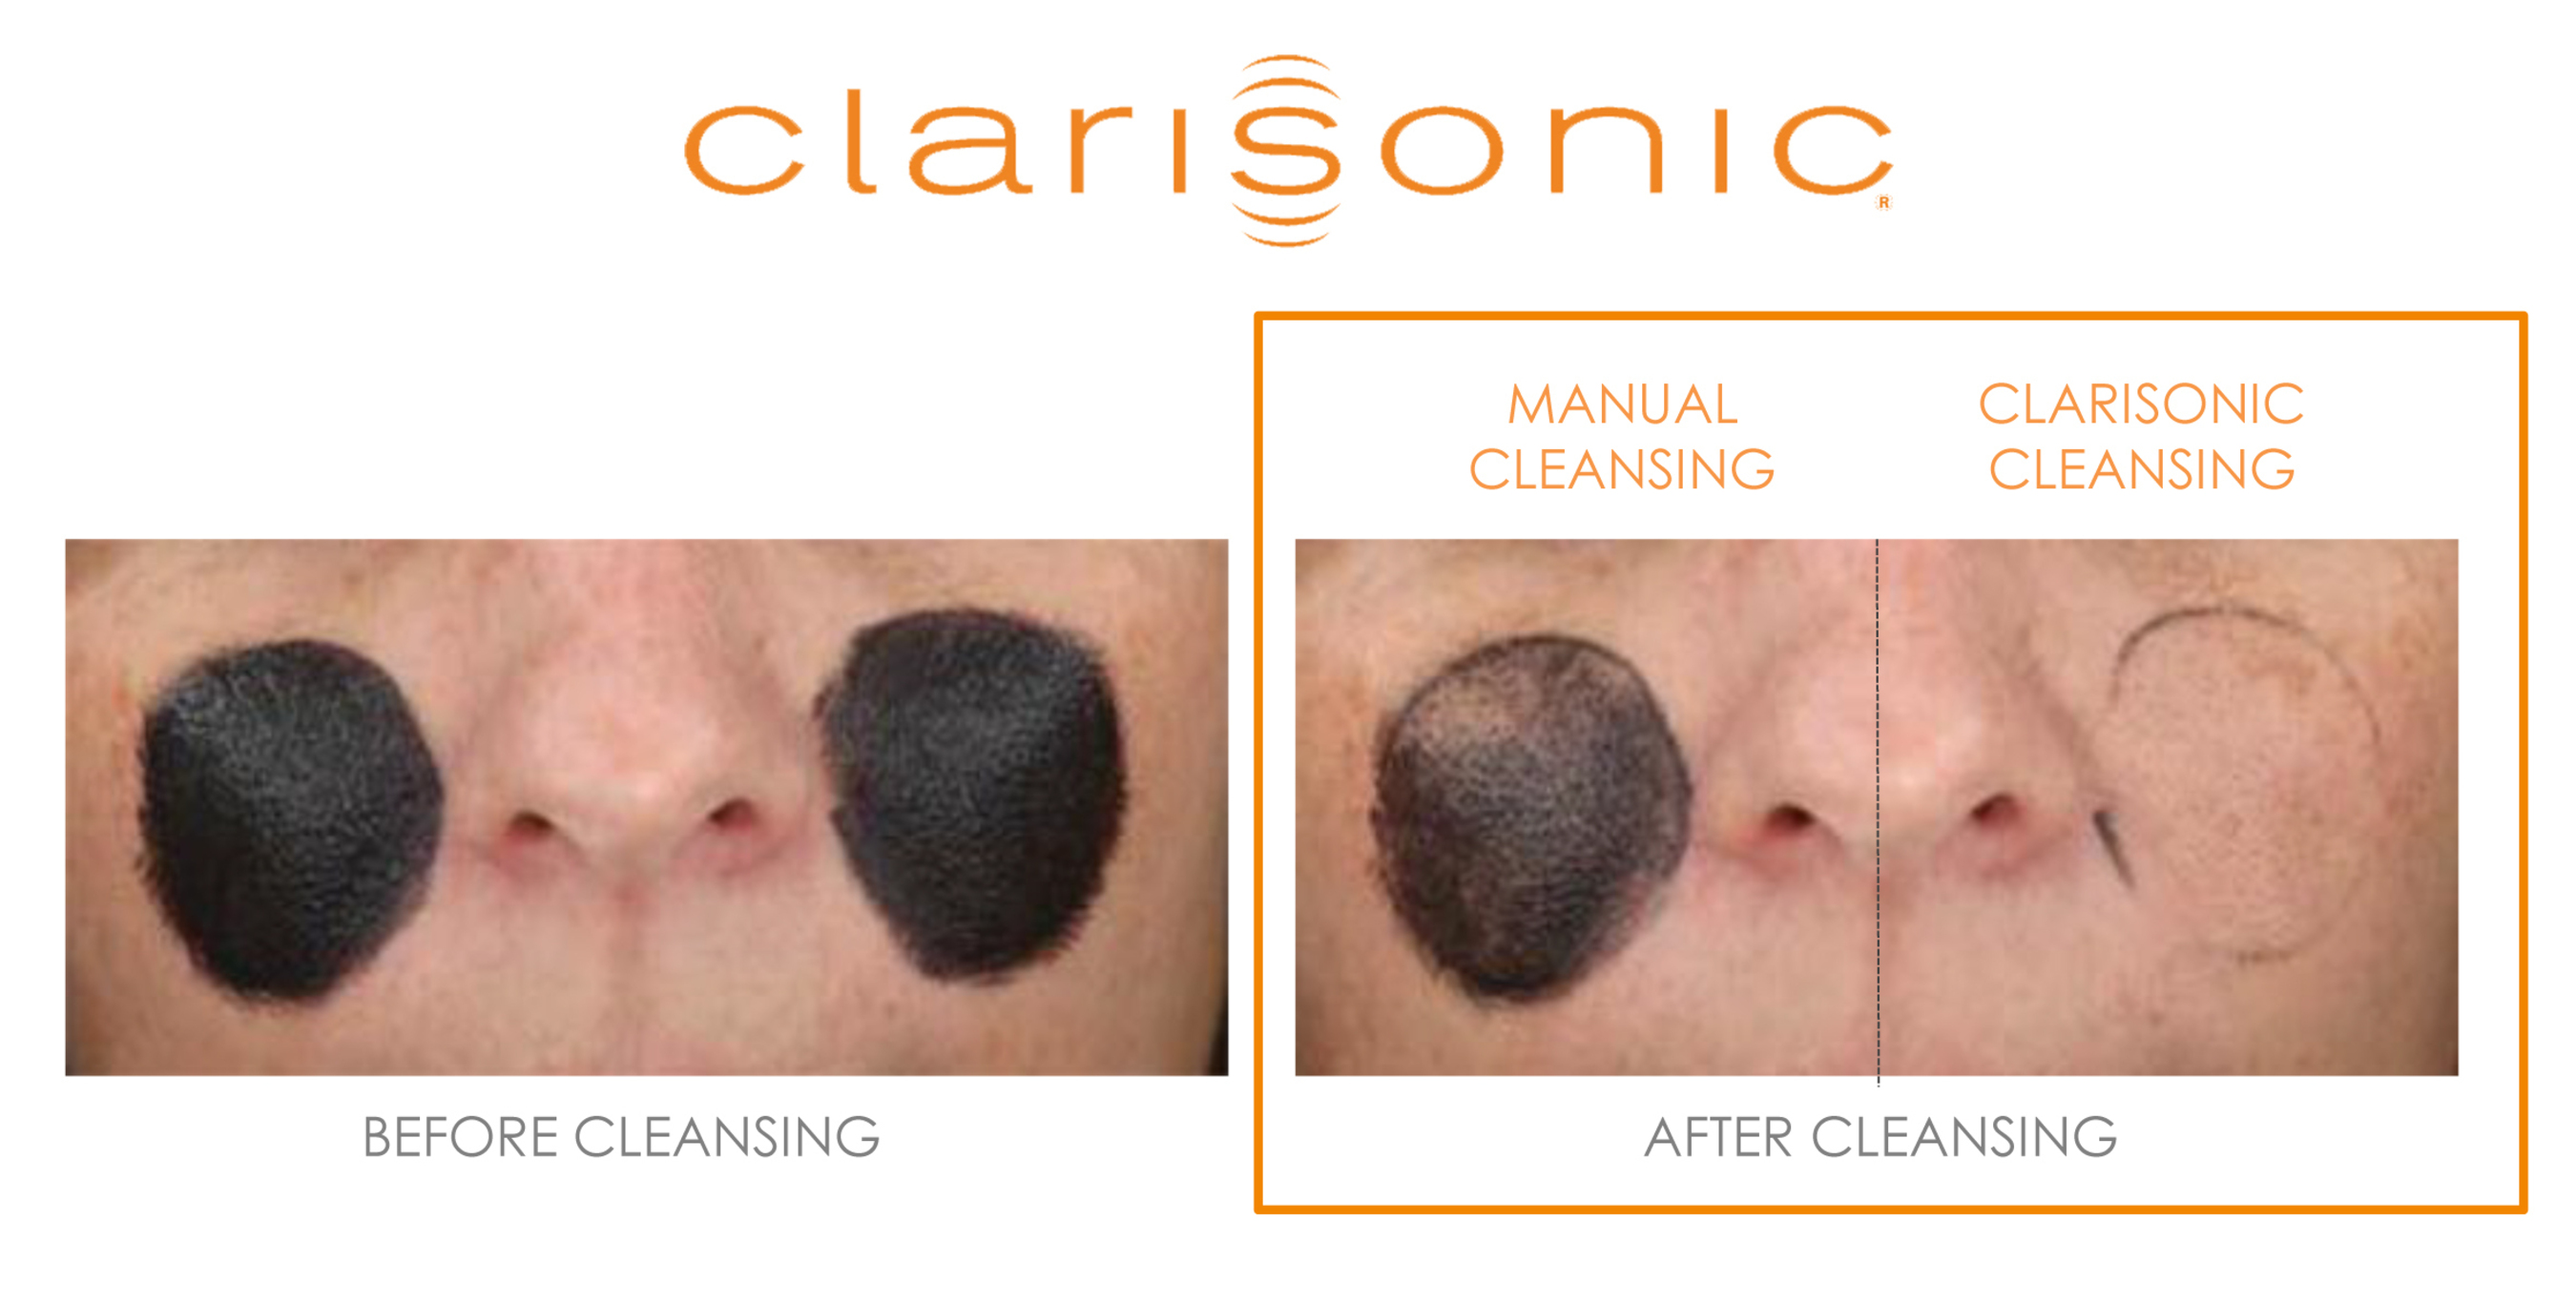 In an eye-opening study, Clarisonic used a tinted pollution marker comprised of pollutants from PM 0.3 - PM 5.0 to investigate the efficacy of removing barely visible pollution particles.  The findings proved the Clarisonic cleansing device has the cleansing power to remove 30 times more harmful age-accelerating pollution than manual cleansing.  (PRNewsFoto/Clarisonic)